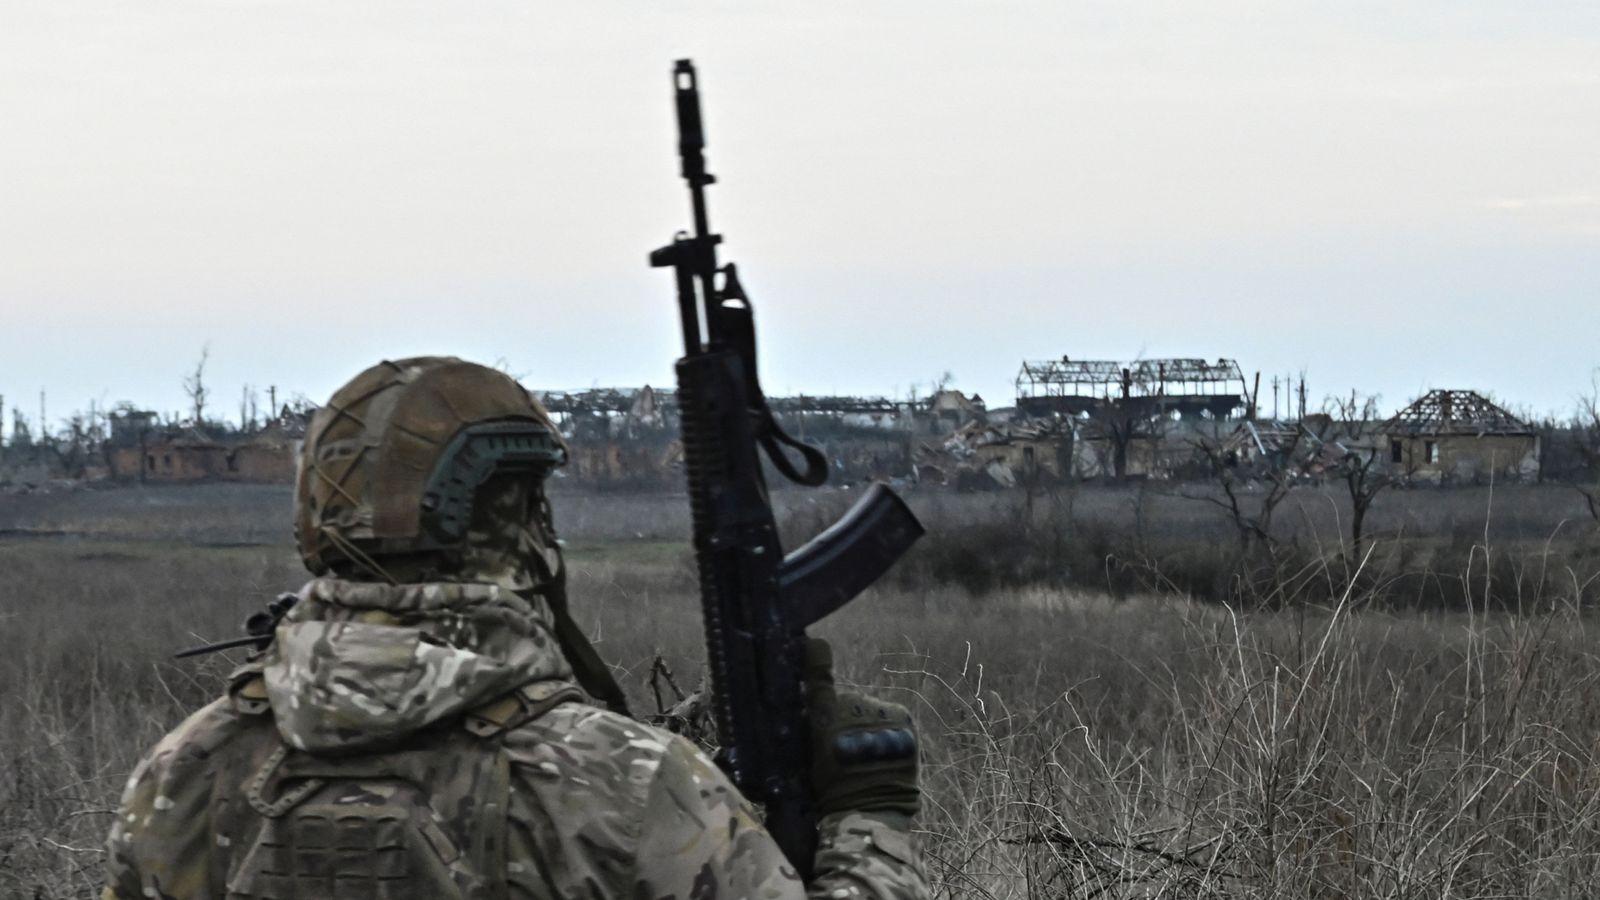 who will win the war? putins's ability to rearm russian forces is far greater than west's ability to re-equip ukrainians